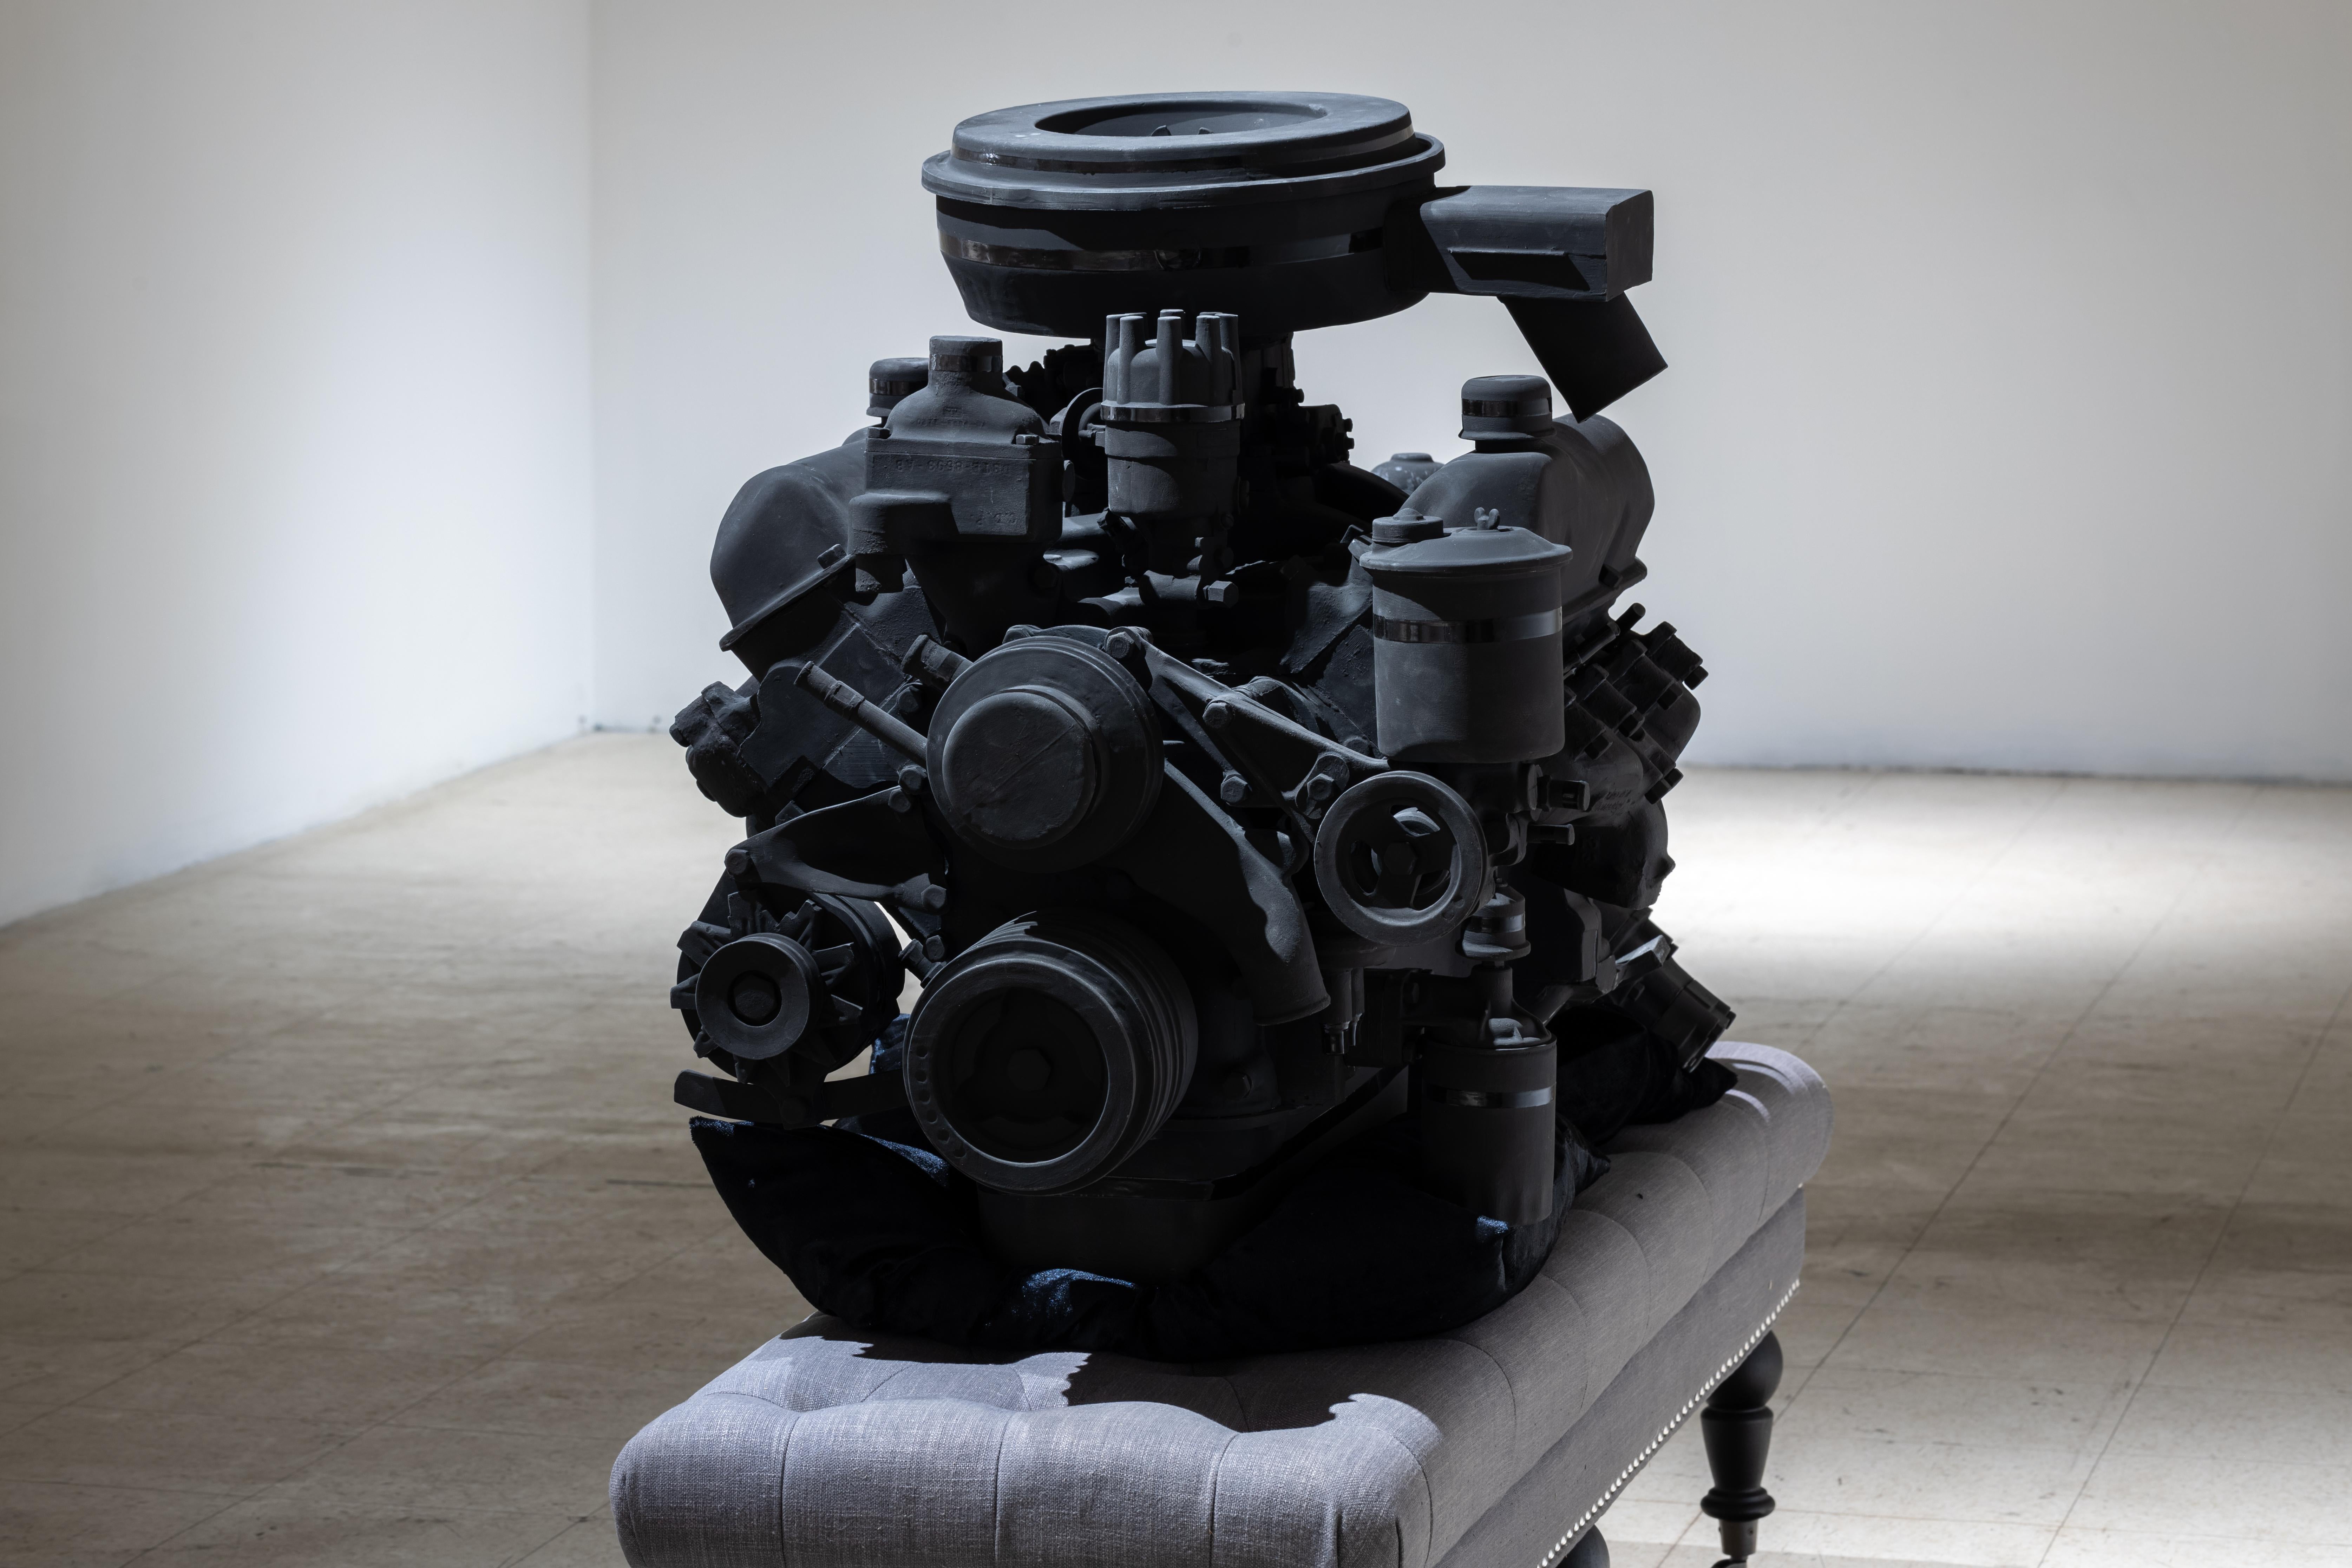 The first work of Clint Neufeld I ever saw was a hulking engine rendered in pink and lime green ceramic, so large that it hung from its own crane. It was called Screaming Jimmy, the first time we met in that field I knew you were the one and it